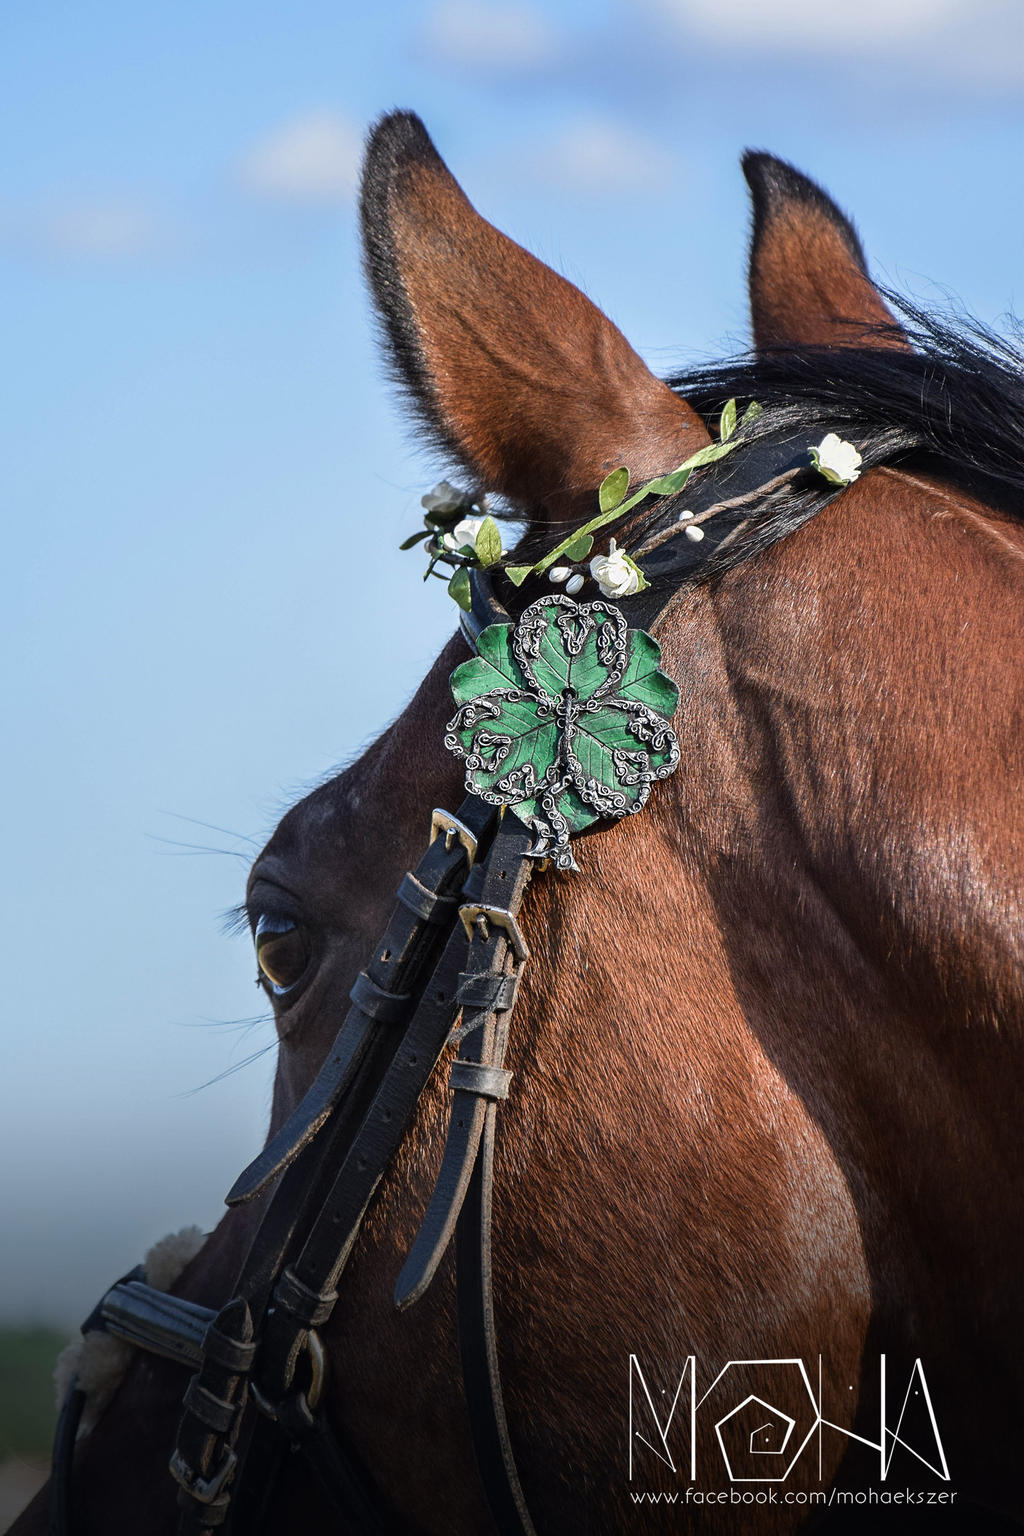 Six-leaf clover bridle ornament - (c)Moha by Moha-jewelry on DeviantArt